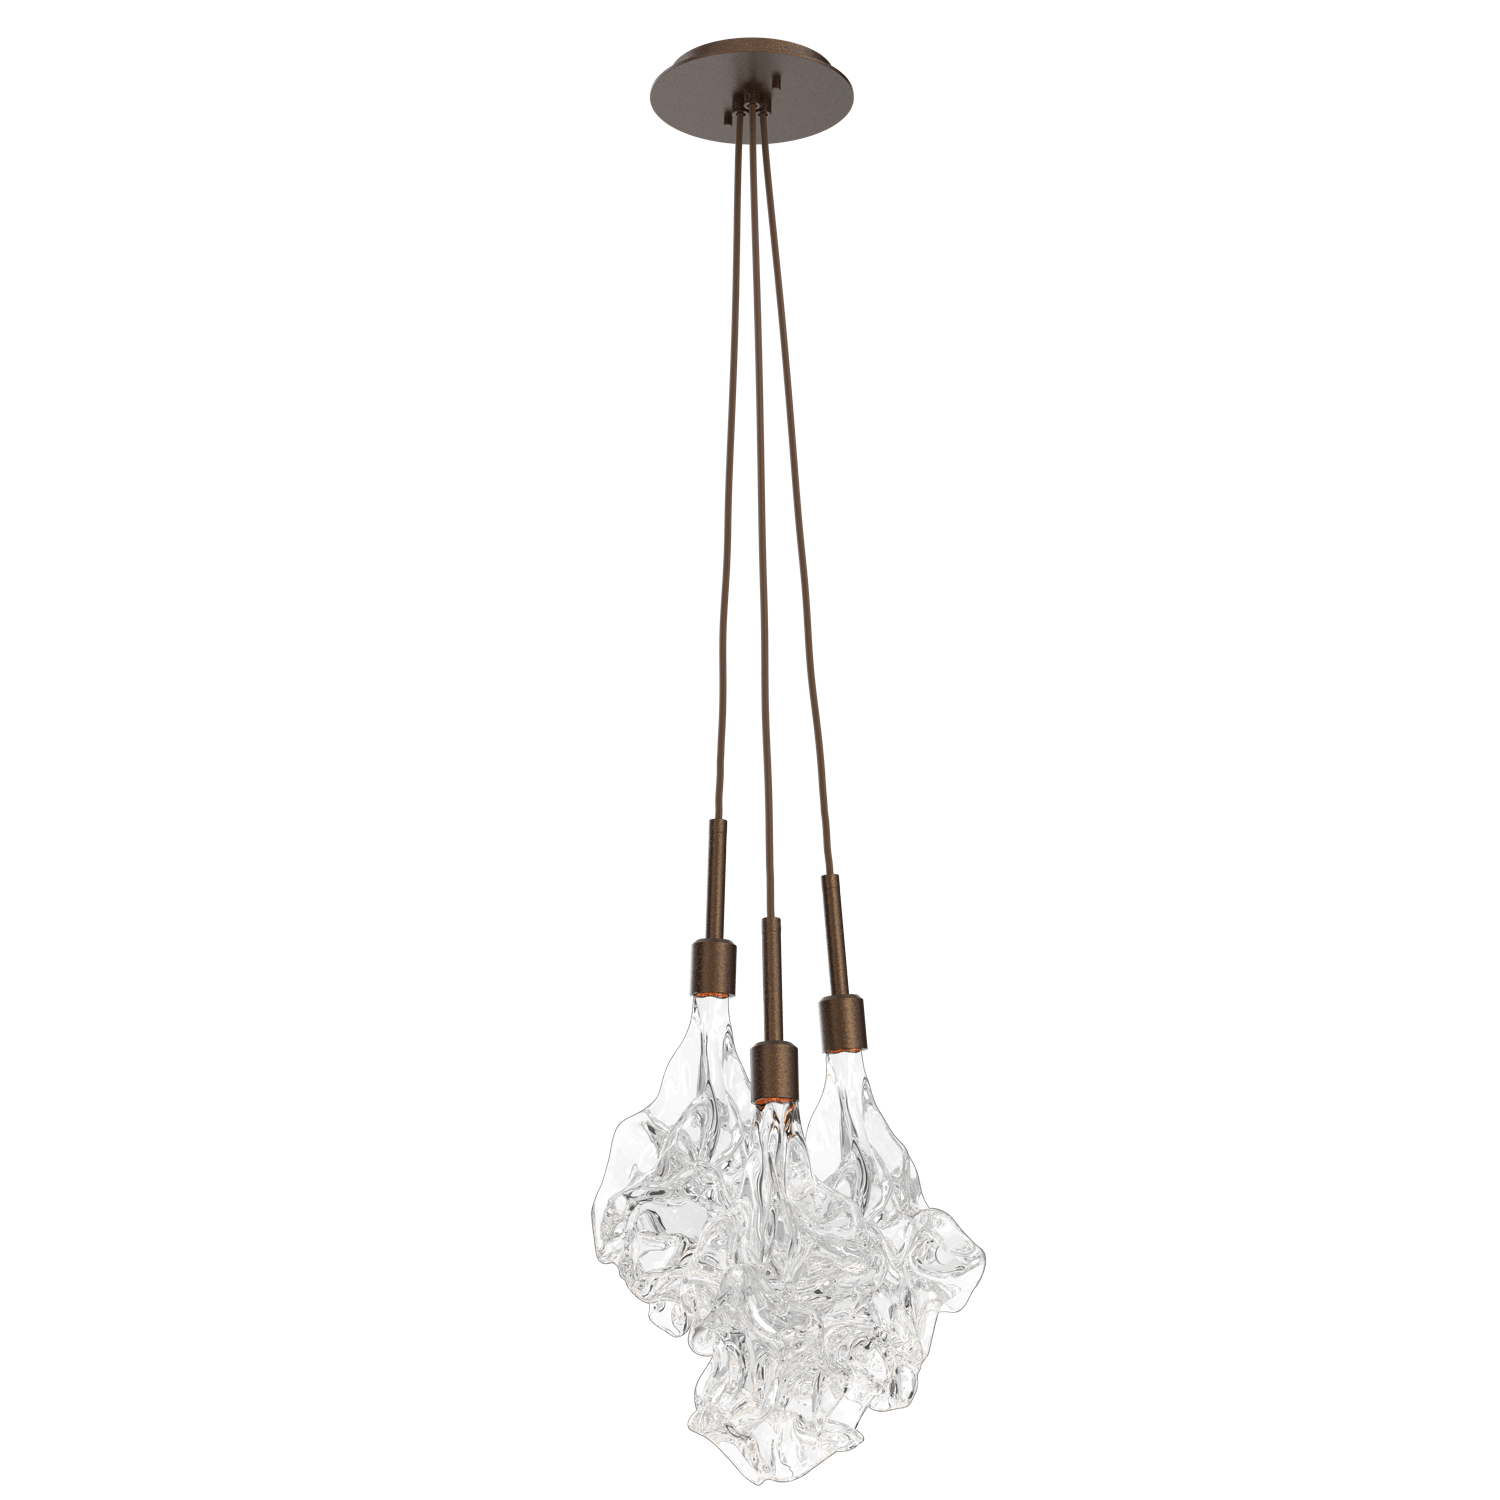 LAB0059-0A-FB-Hammerton-Studio-Blossom-3-light-cluster-pendant-light-with-flat-bronze-finish-and-clear-handblown-crystal-glass-shades-and-LED-lamping